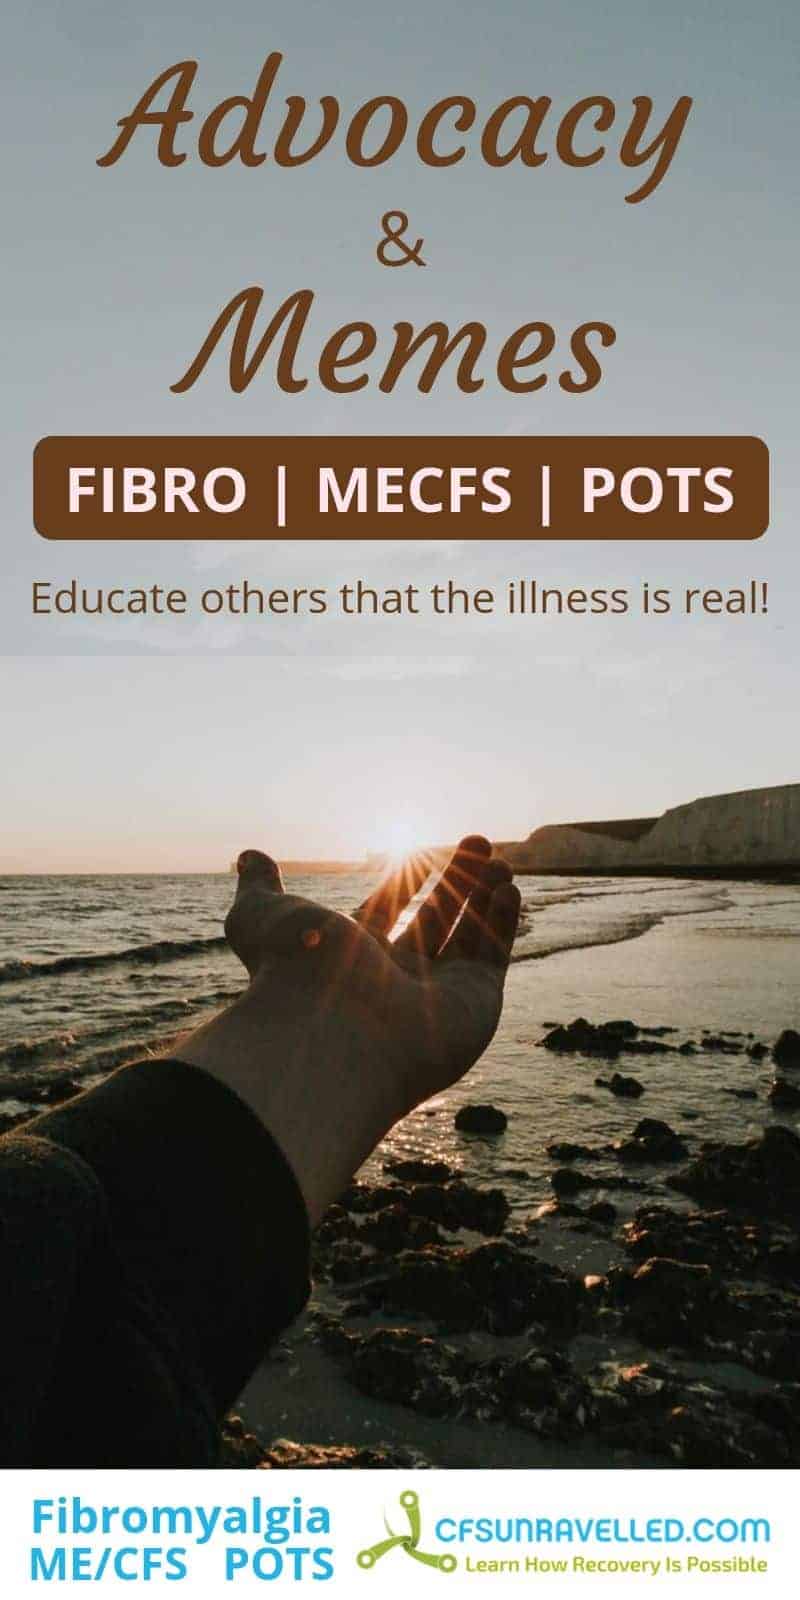 MECFS Fibromyalgia POTS advocacy heading with hand reaching out to sunset